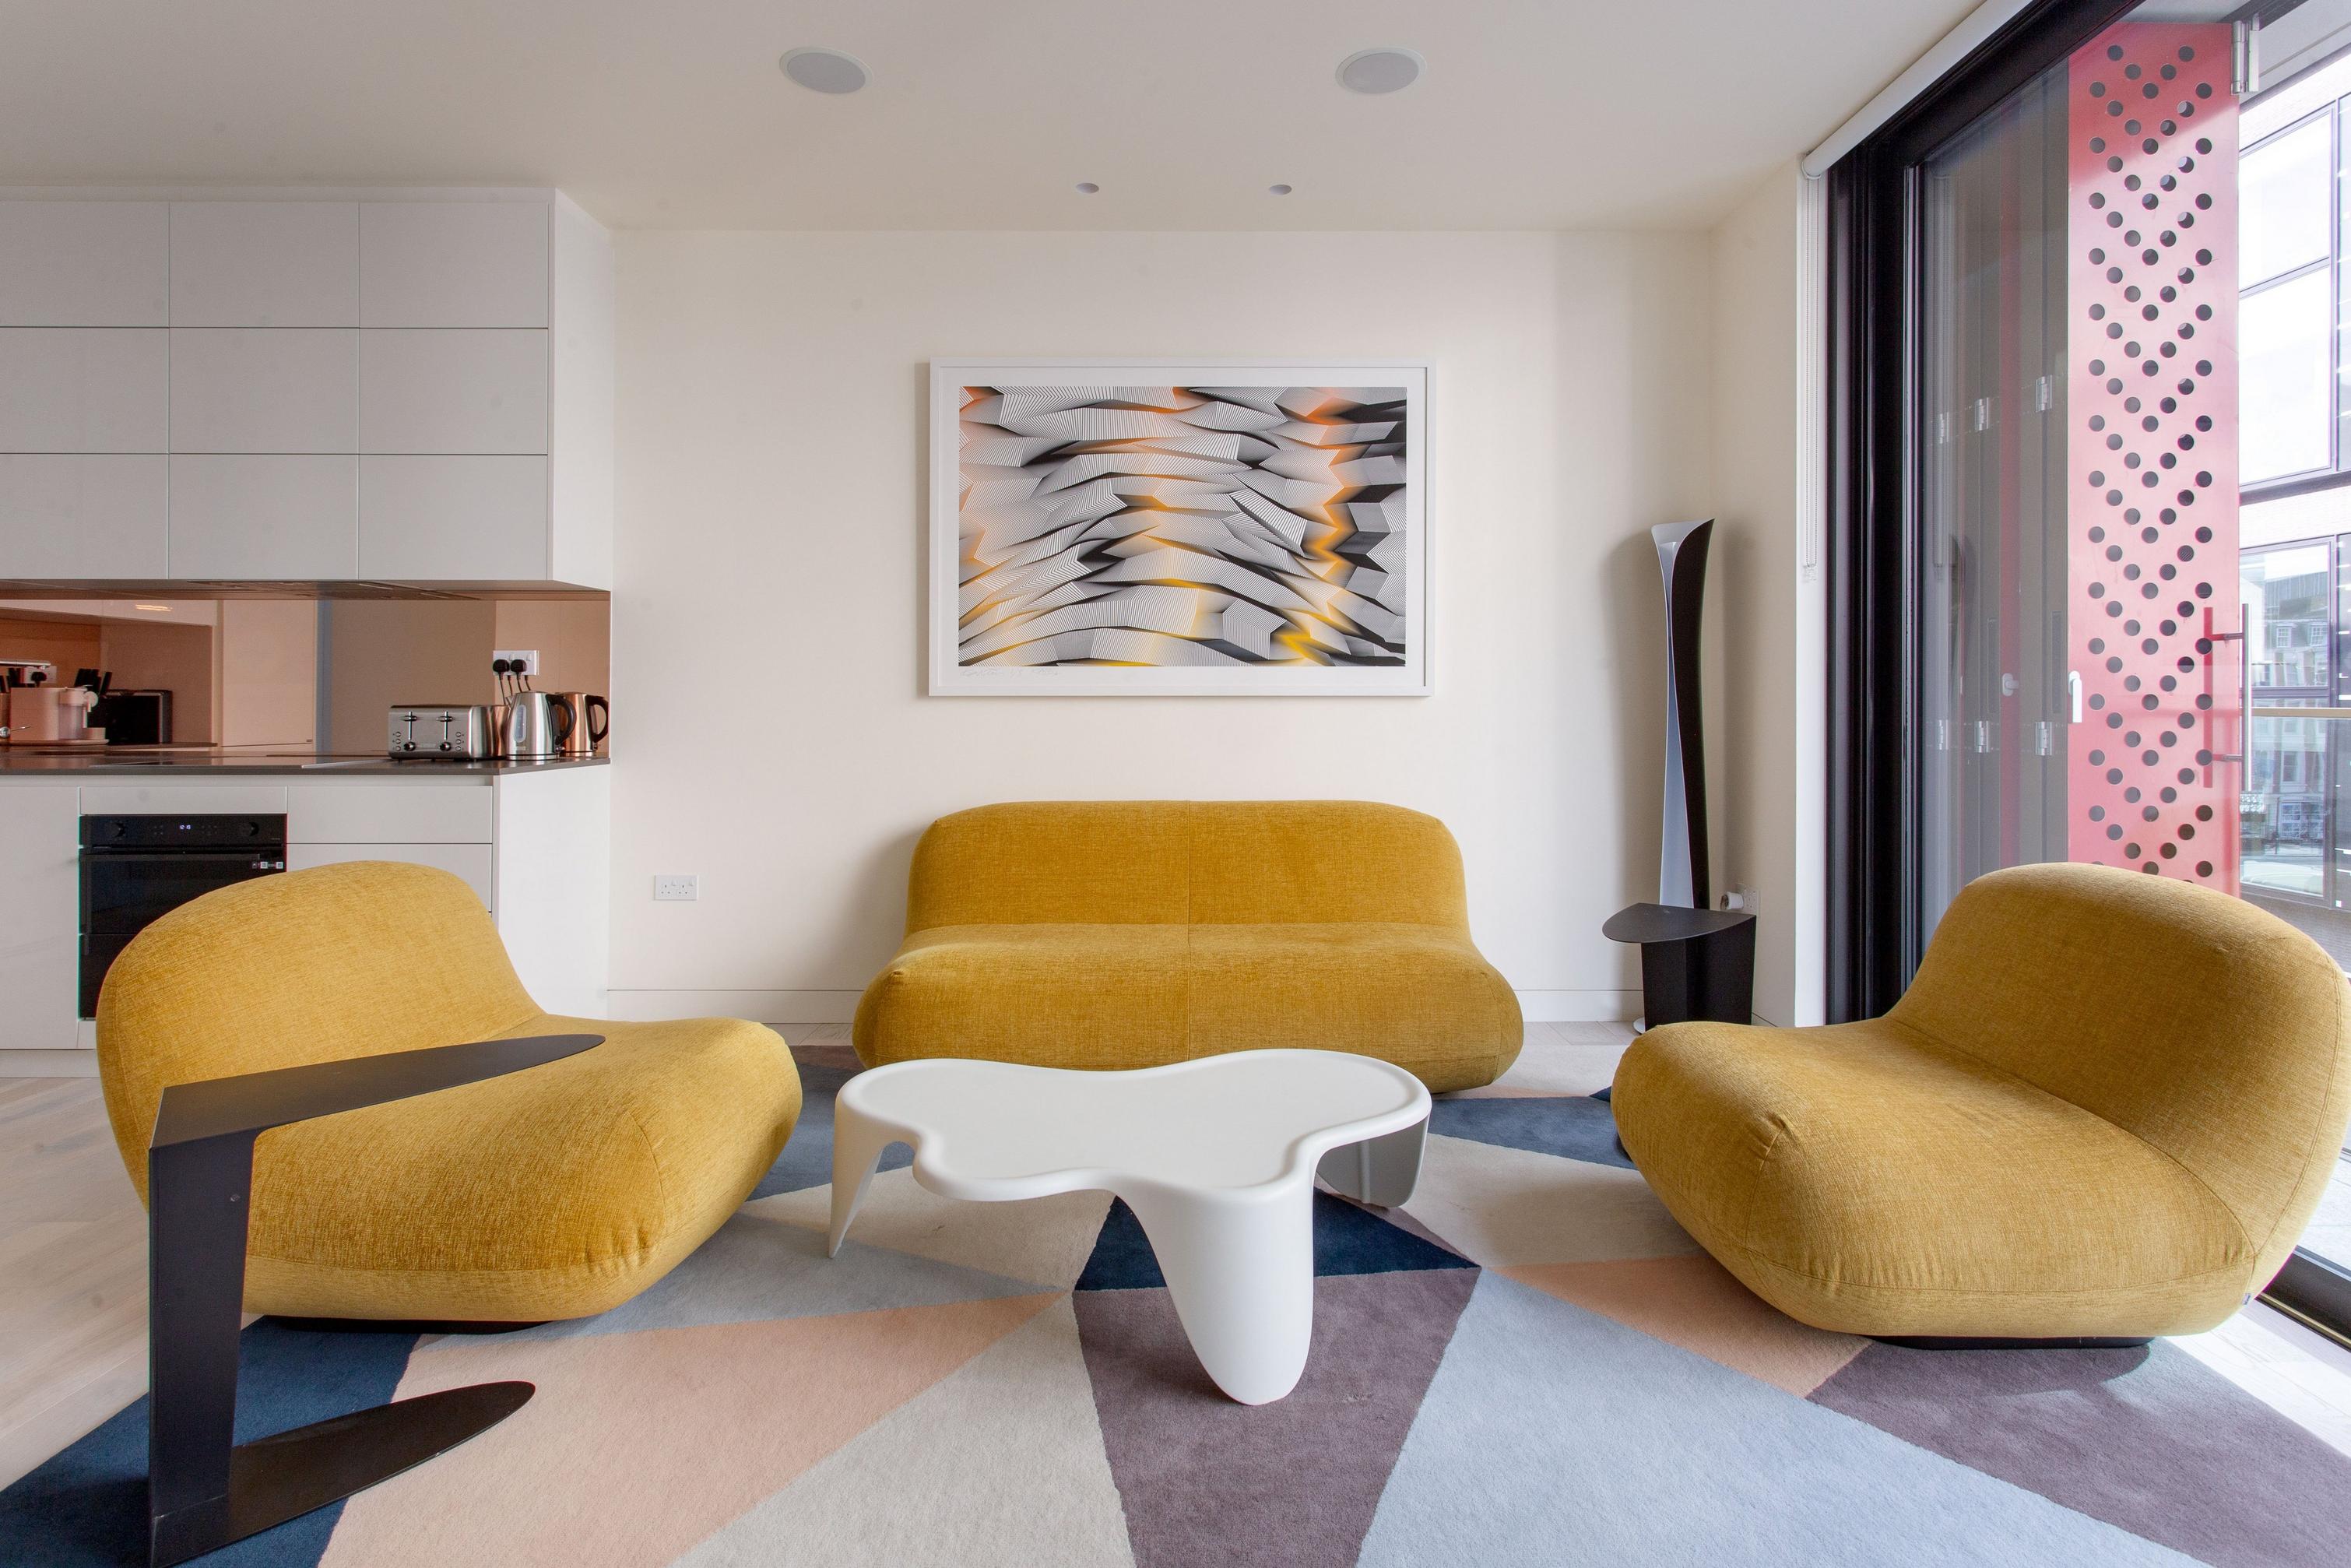 Modern living room with yellow Chelsea chairs, abstract art, and geometric rug.